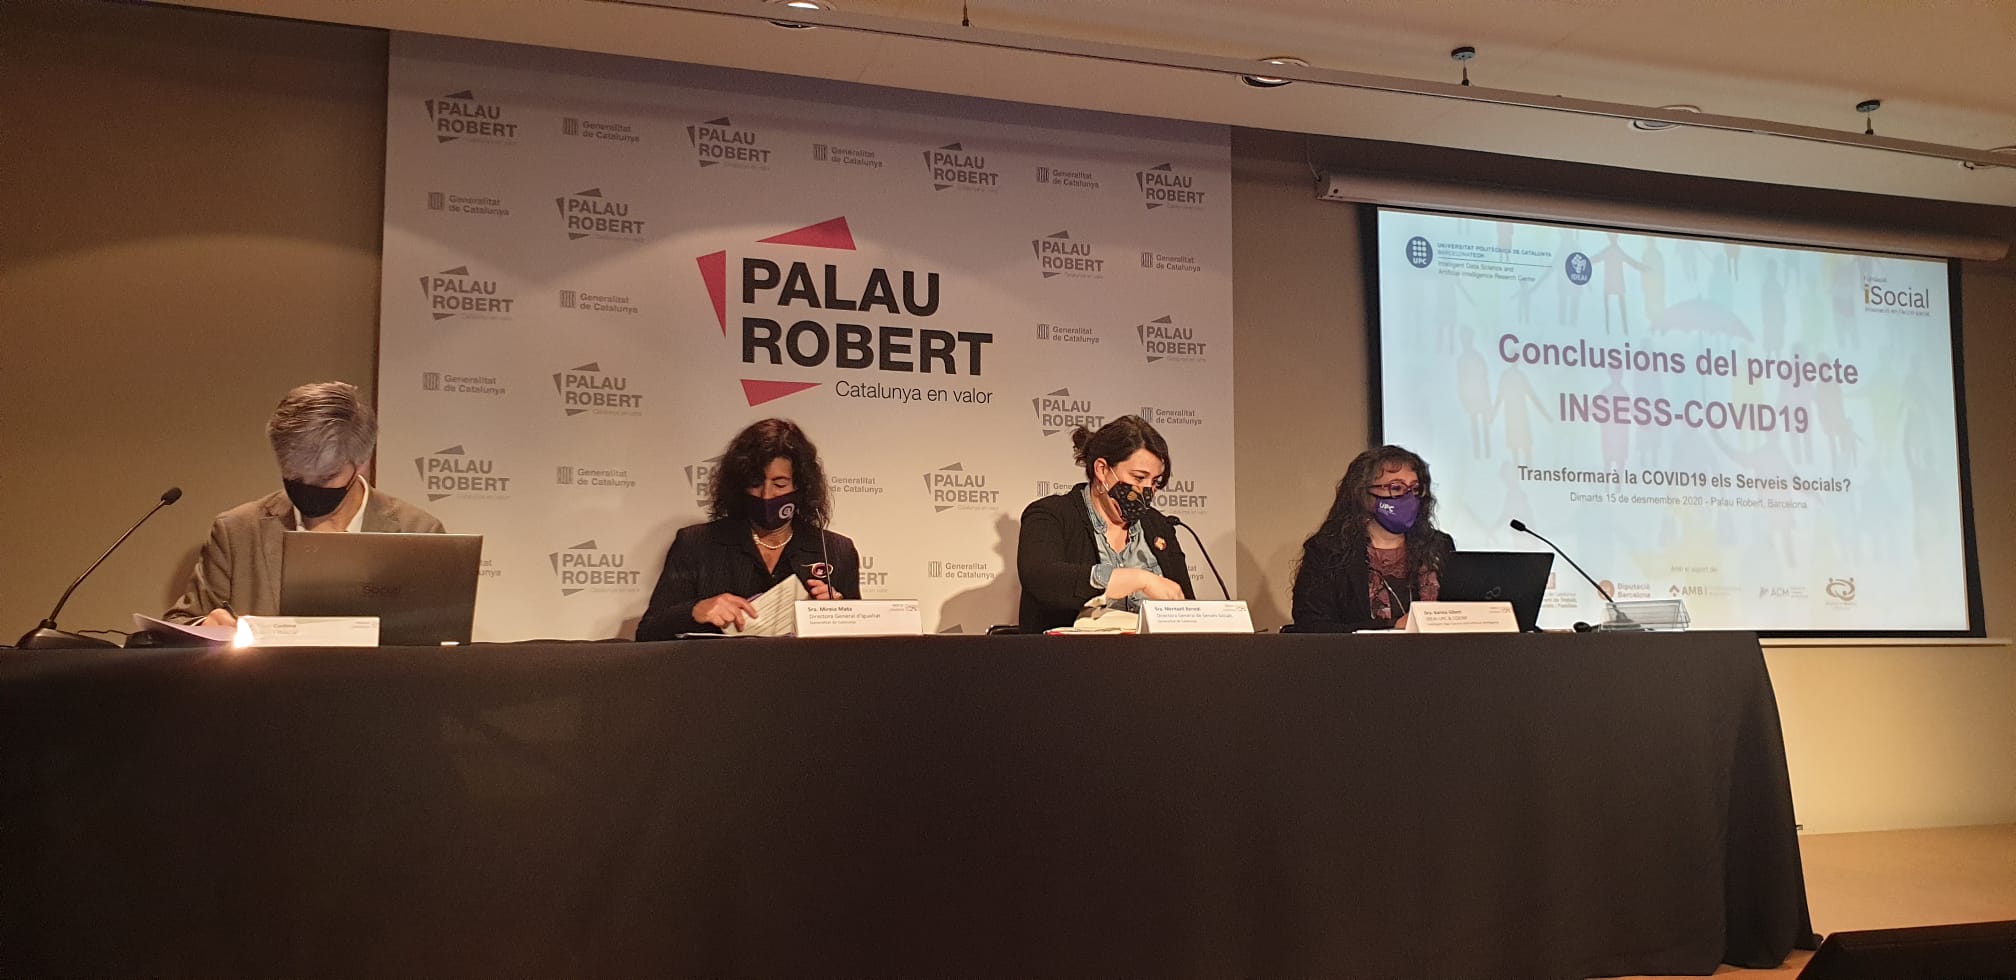 iSocial and the UPC have presented the conclusions of the INSESS-COVID19 study at Palau Robert